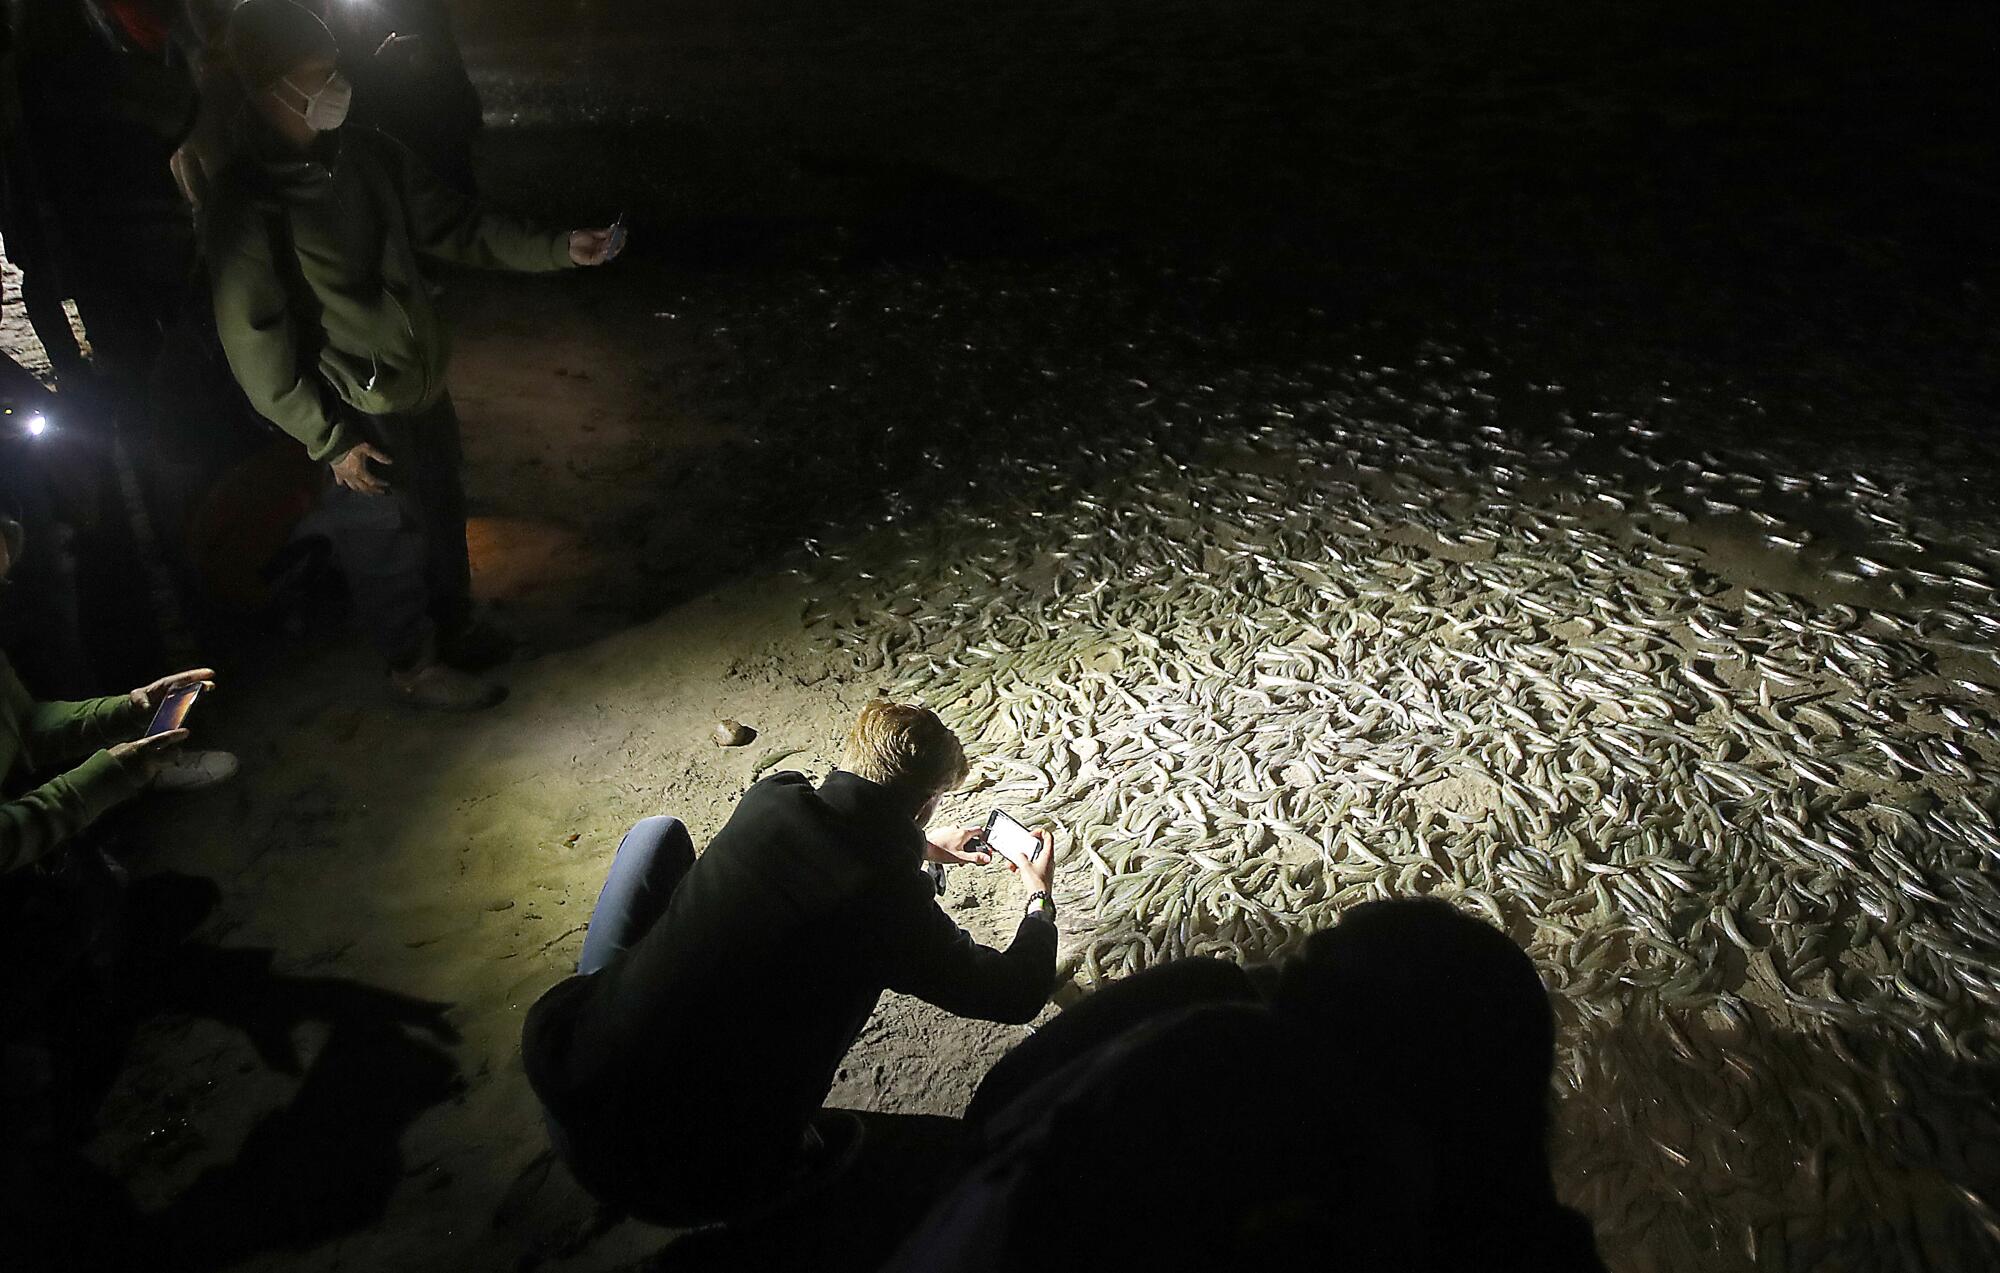 A man takes a photo of a mass of grunion